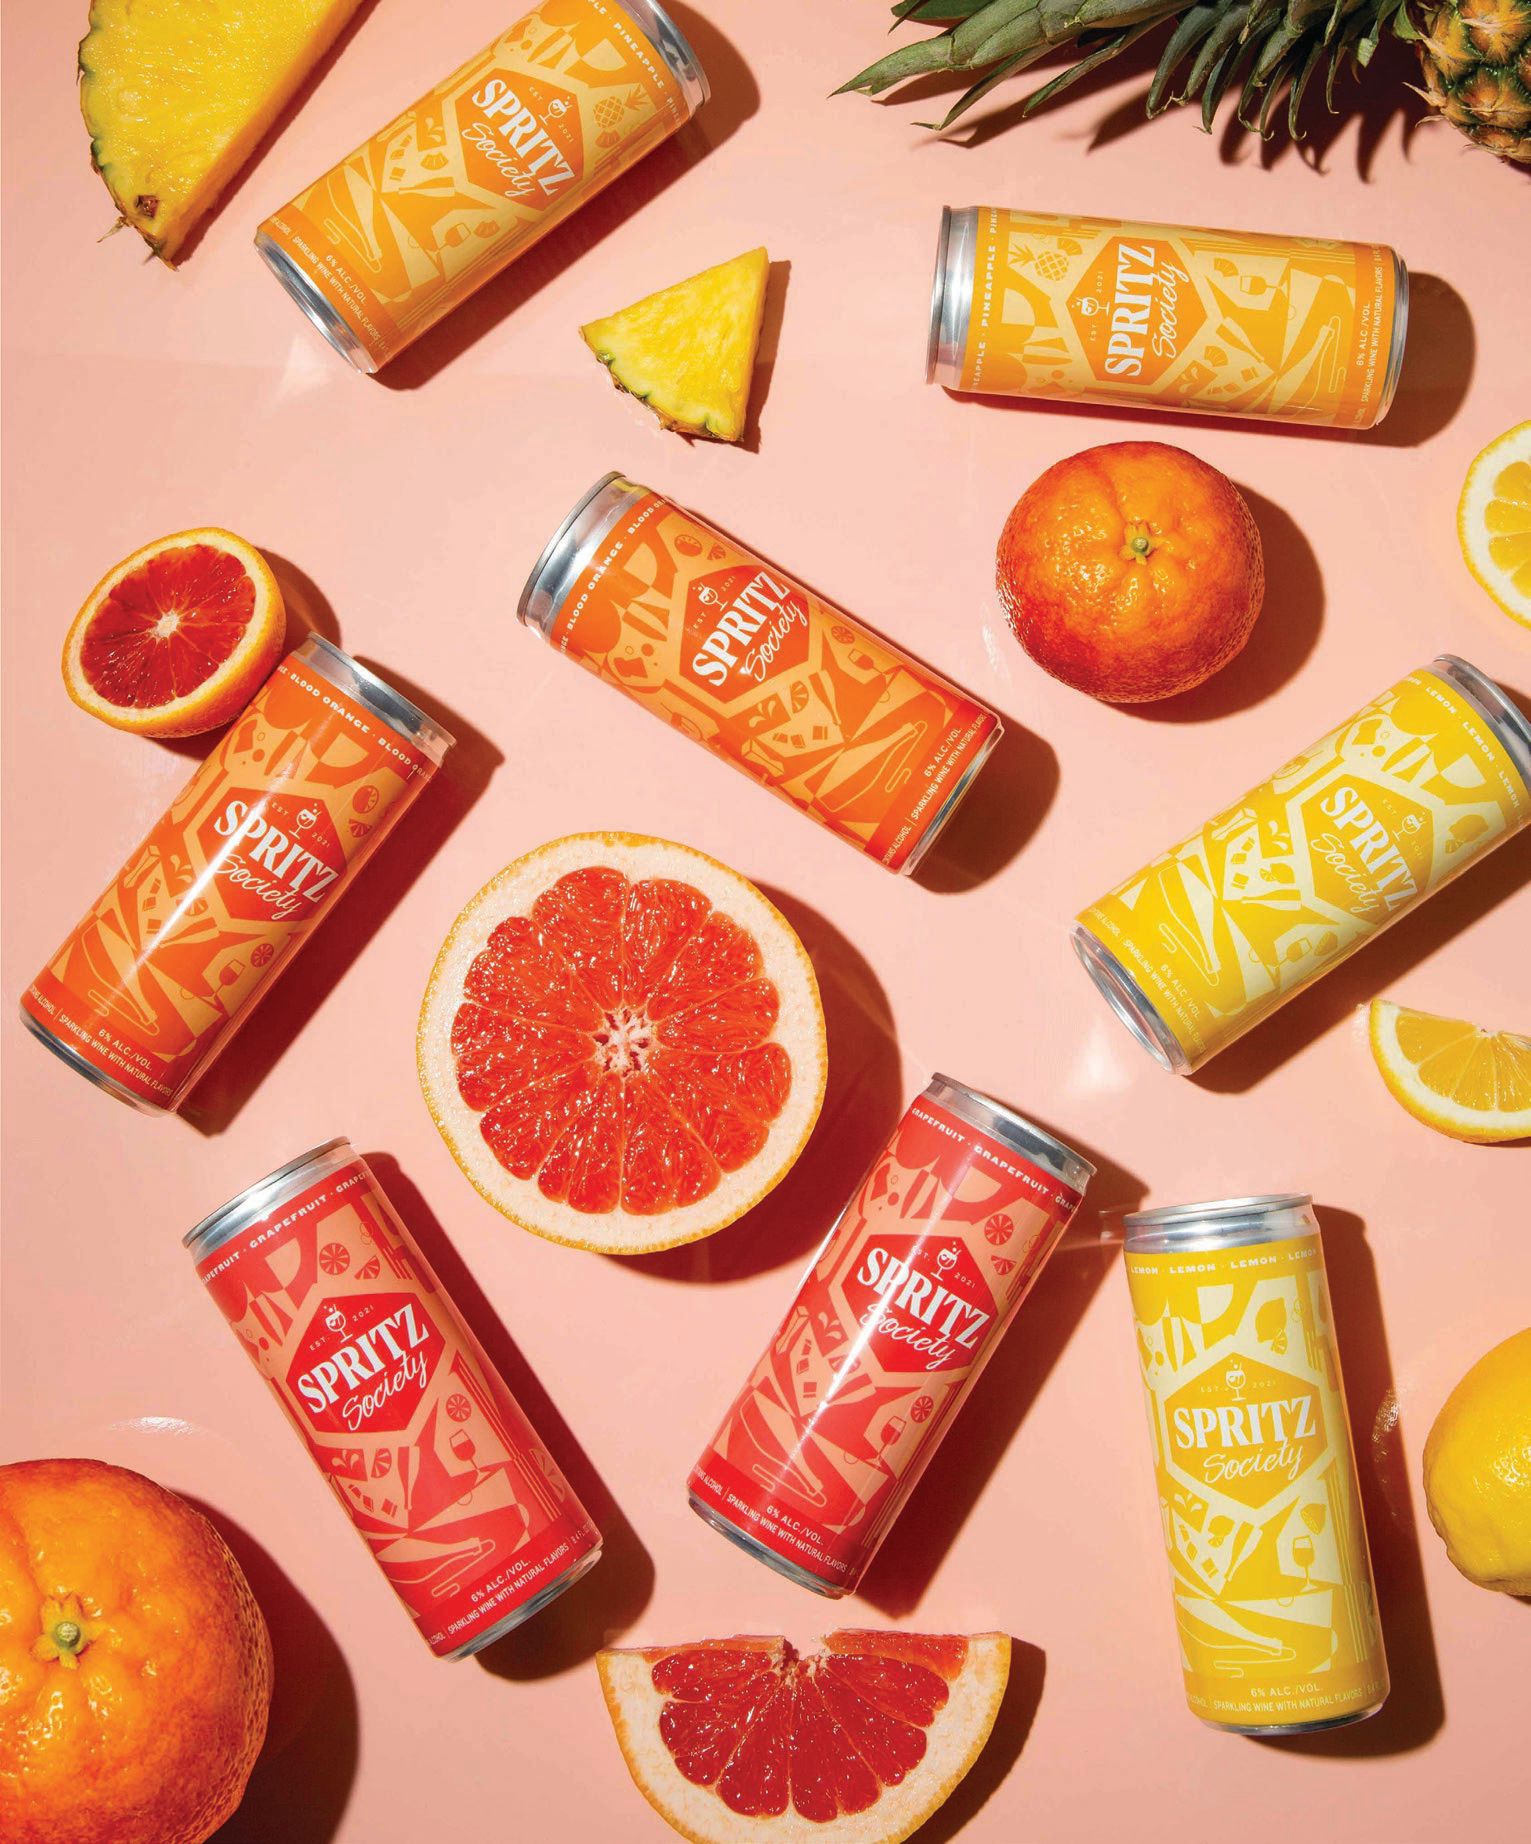 Get Peach Spritz Society and all other Spritz Society flavors at your local Total Wine in the metro Atlanta area. LIFESTYLE PHOTOS BY NAKA STUDIOS; CAN PHOTO COURTESY OF SPRITZ SOCIETY